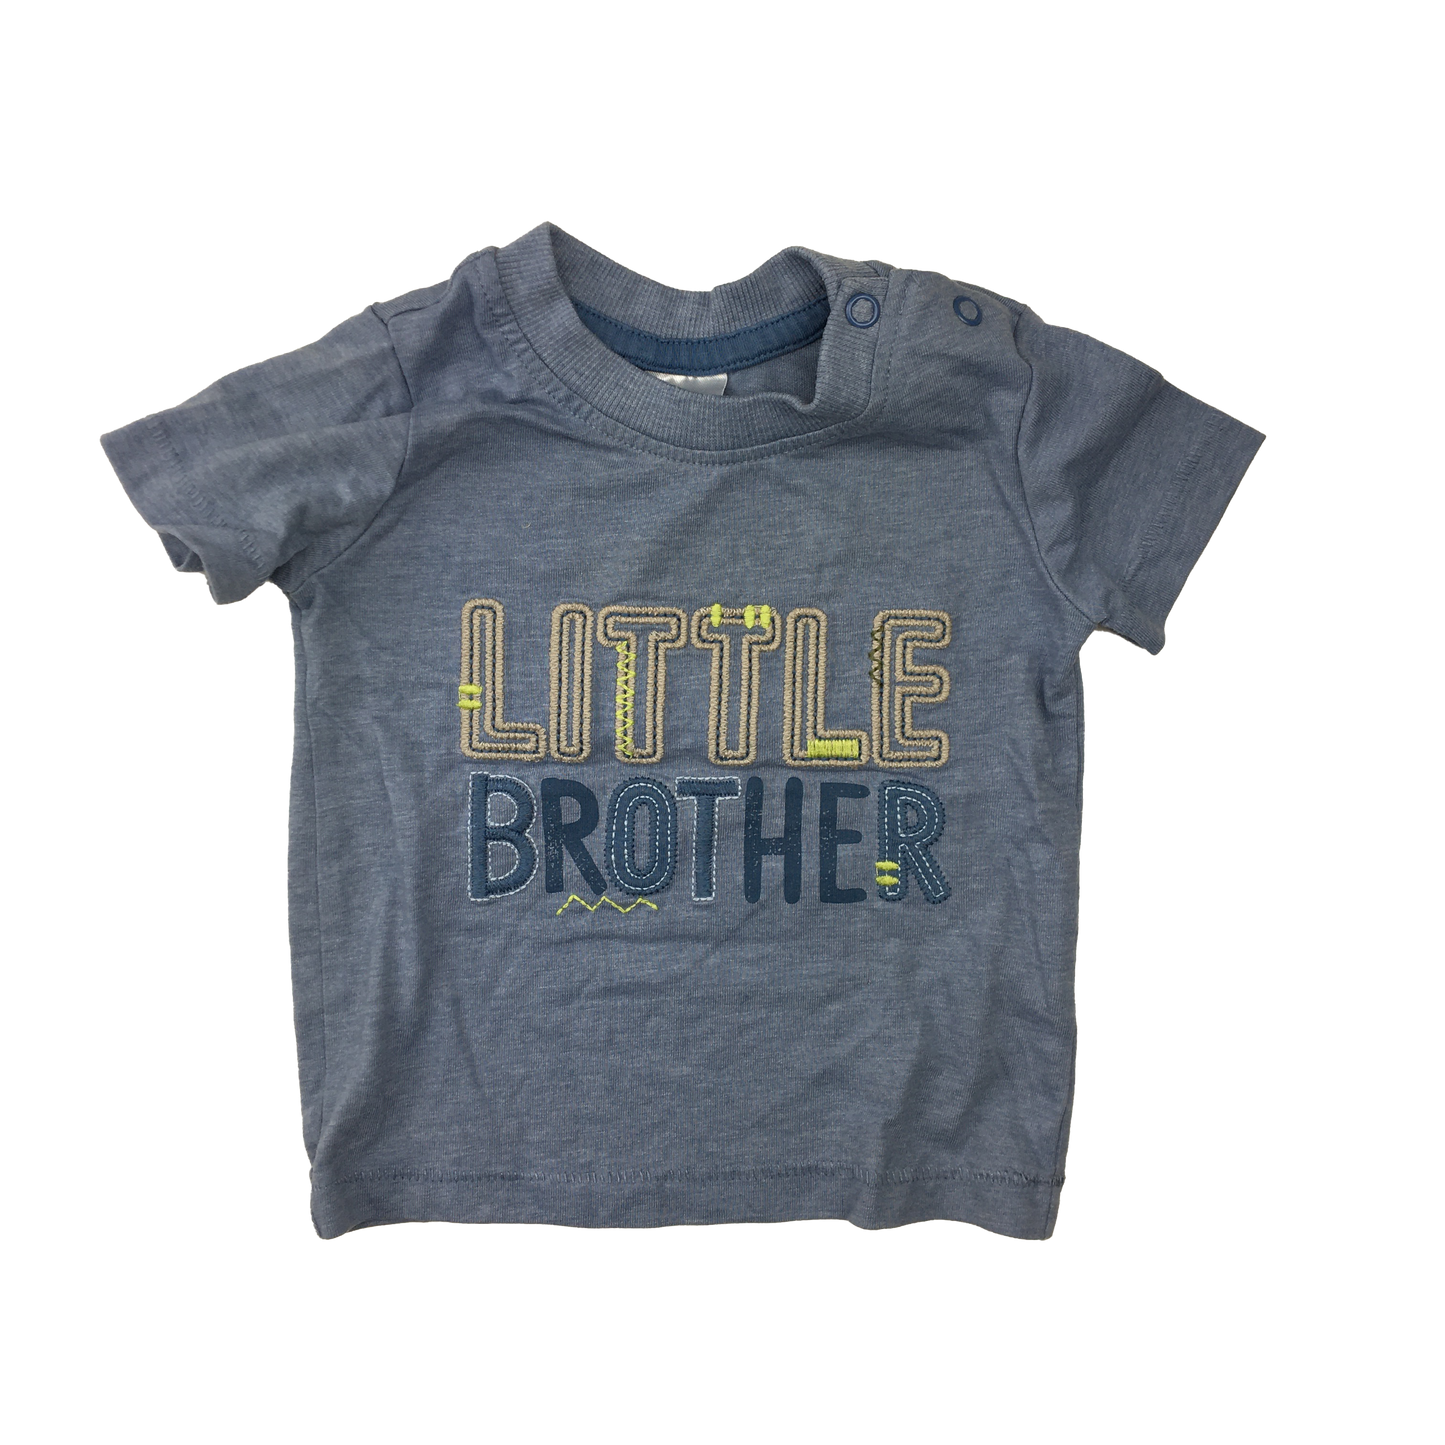 George Blue T-Shirt "Little Brother" 3-6M